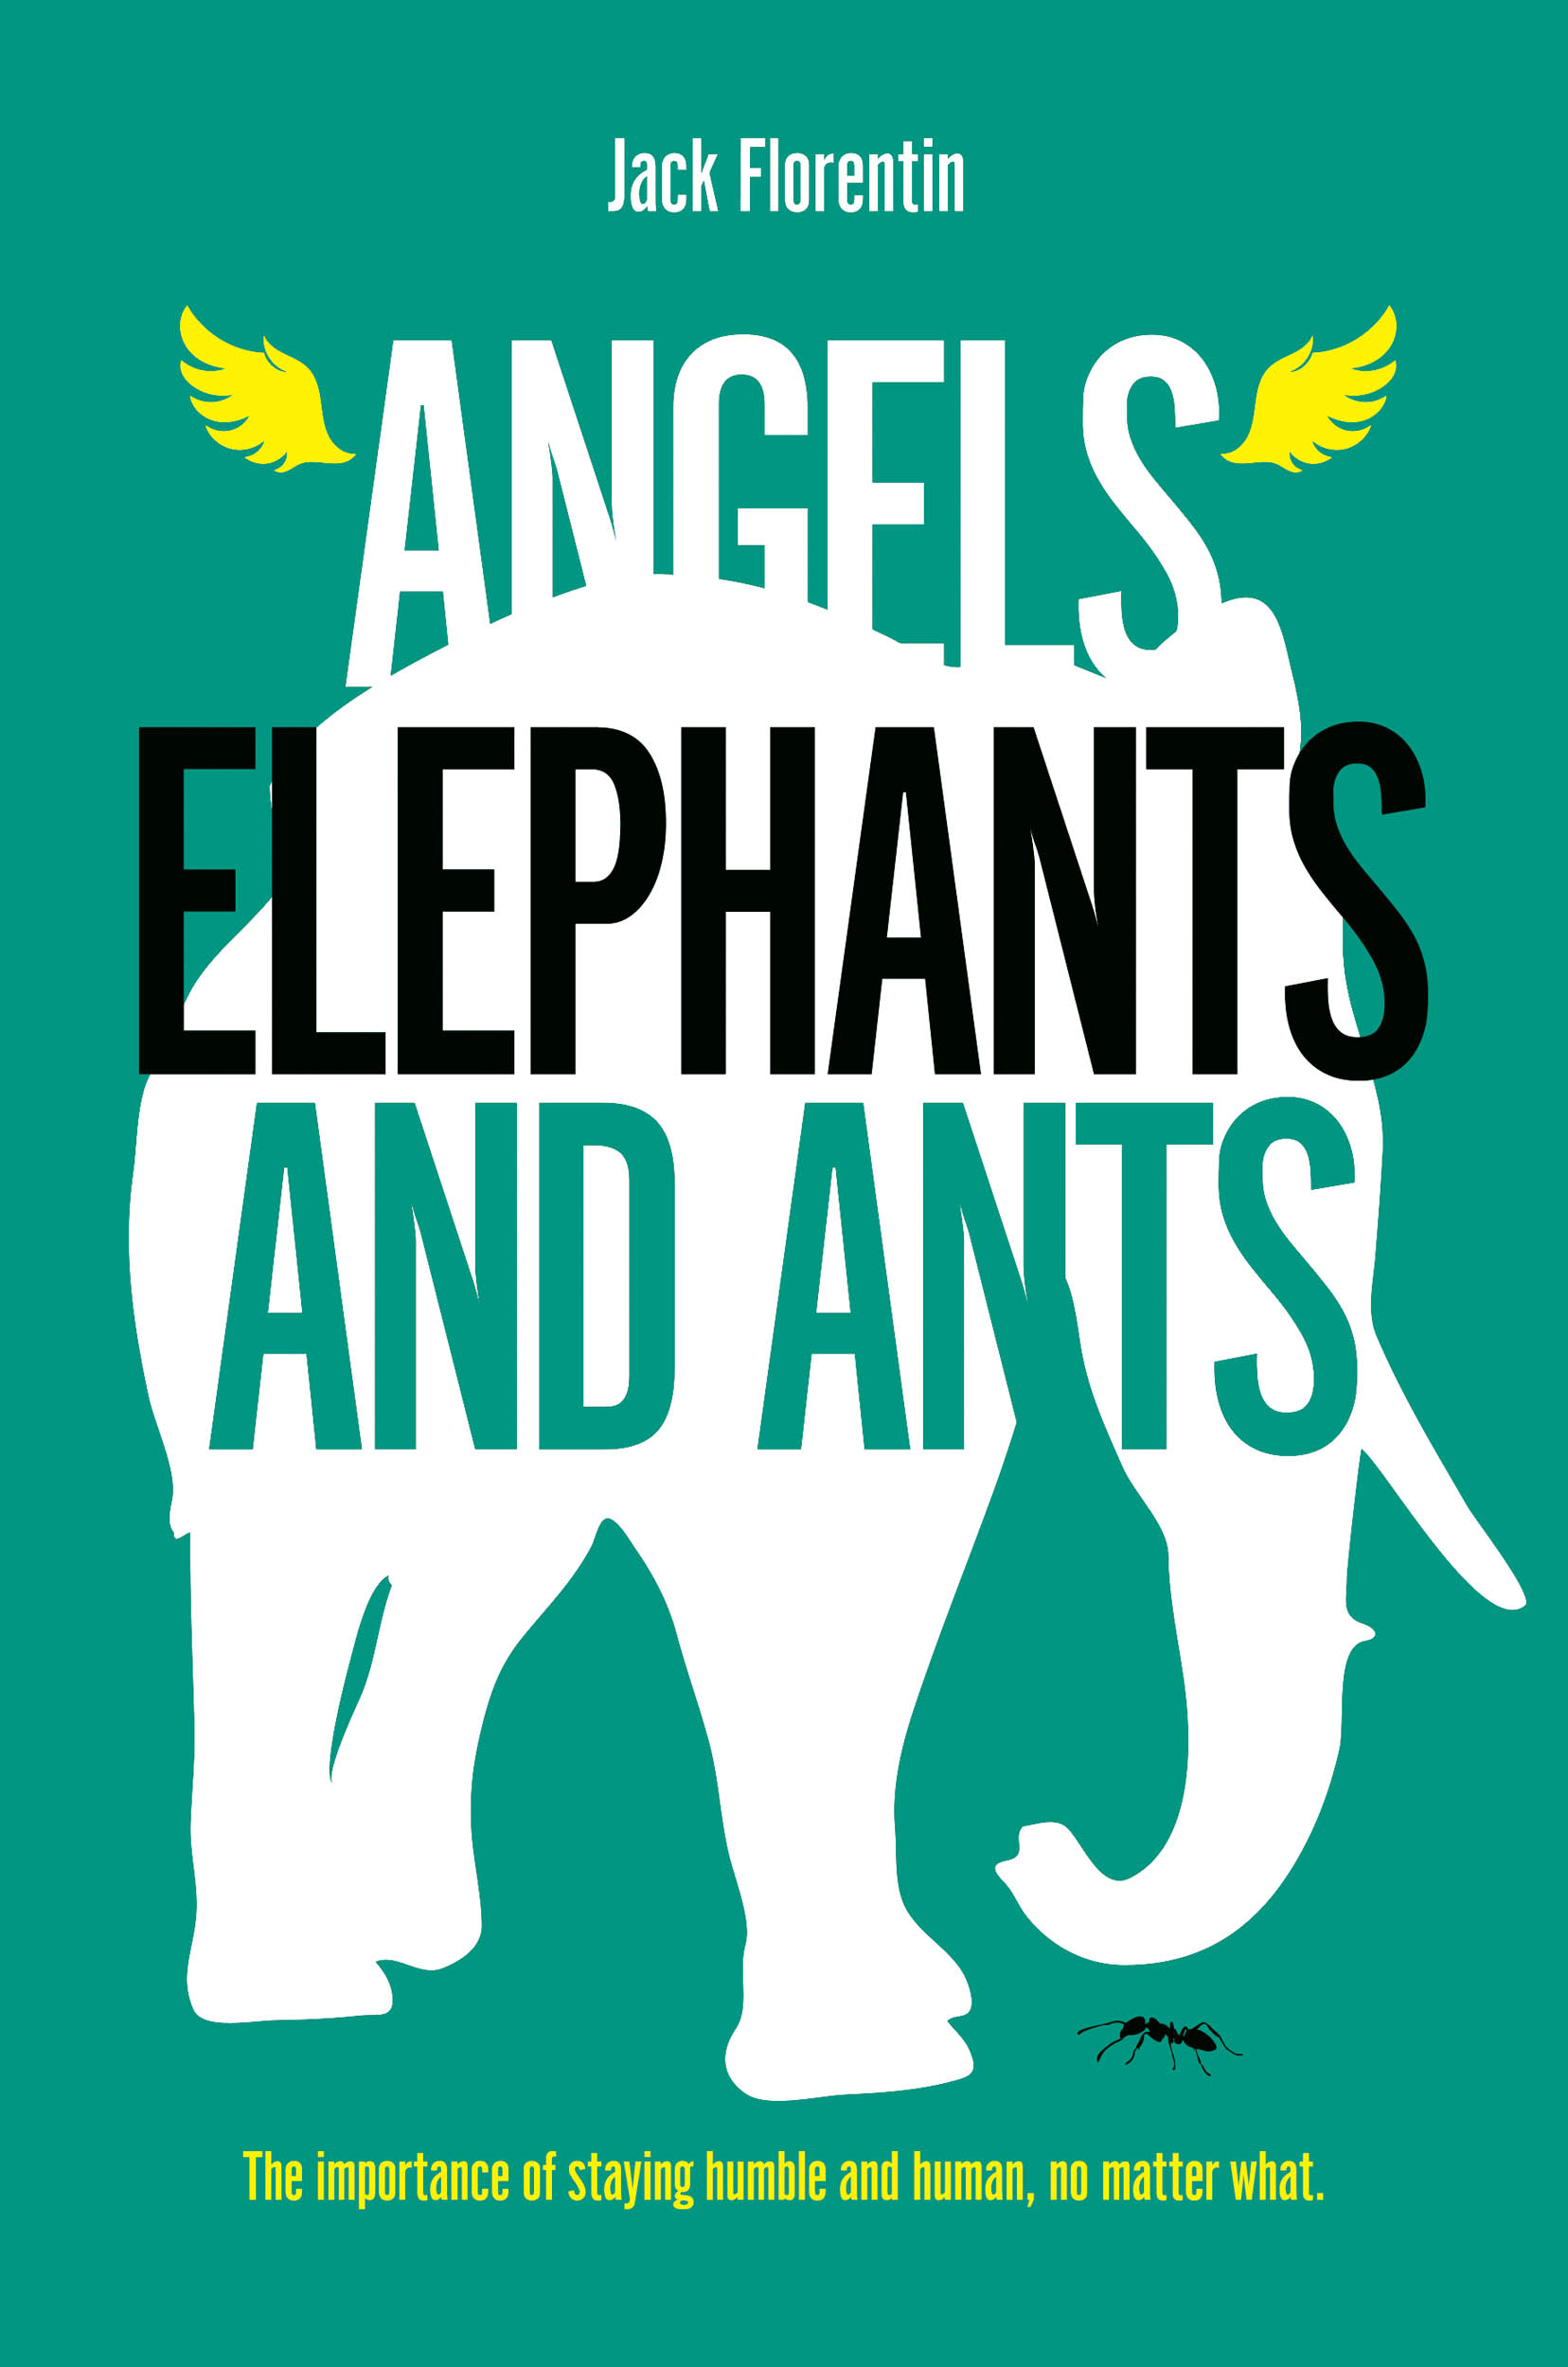 FREE: Angels, Elephants and Ants by Jack Florentin